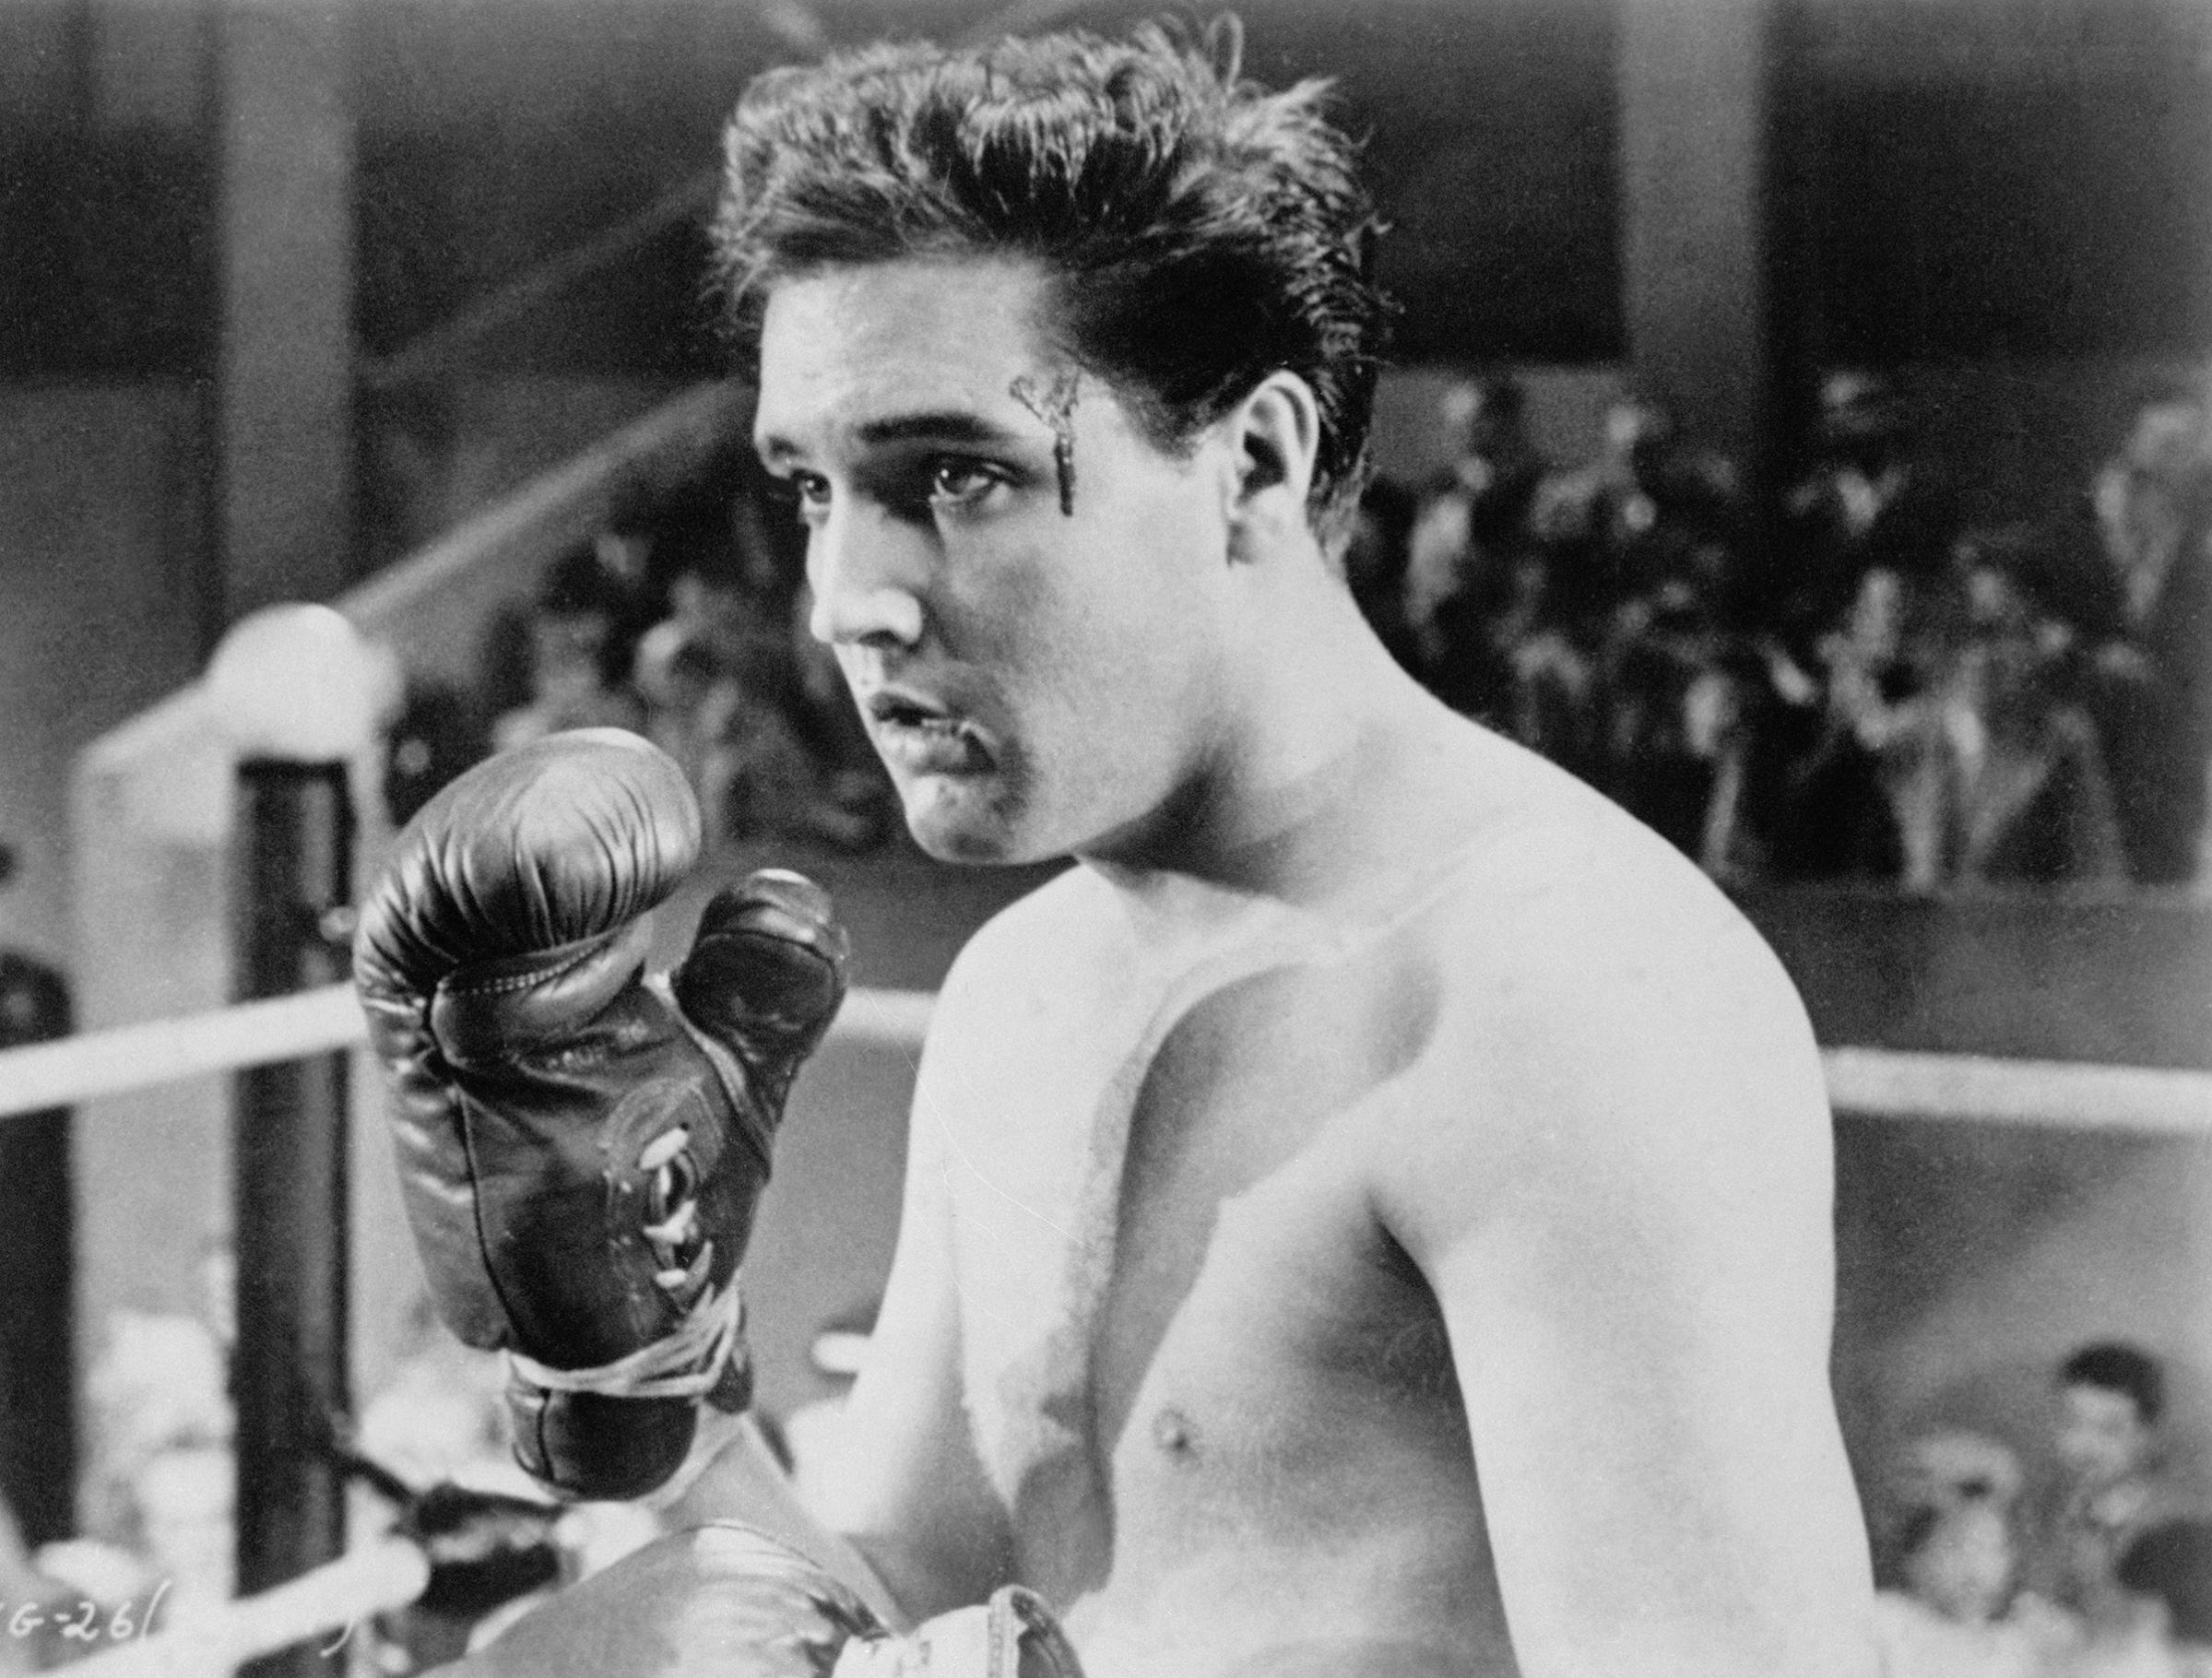 "Kid Galahad"1962, Elvis shows what he looks like after he gets slammed around in a remake of an old boxing film.